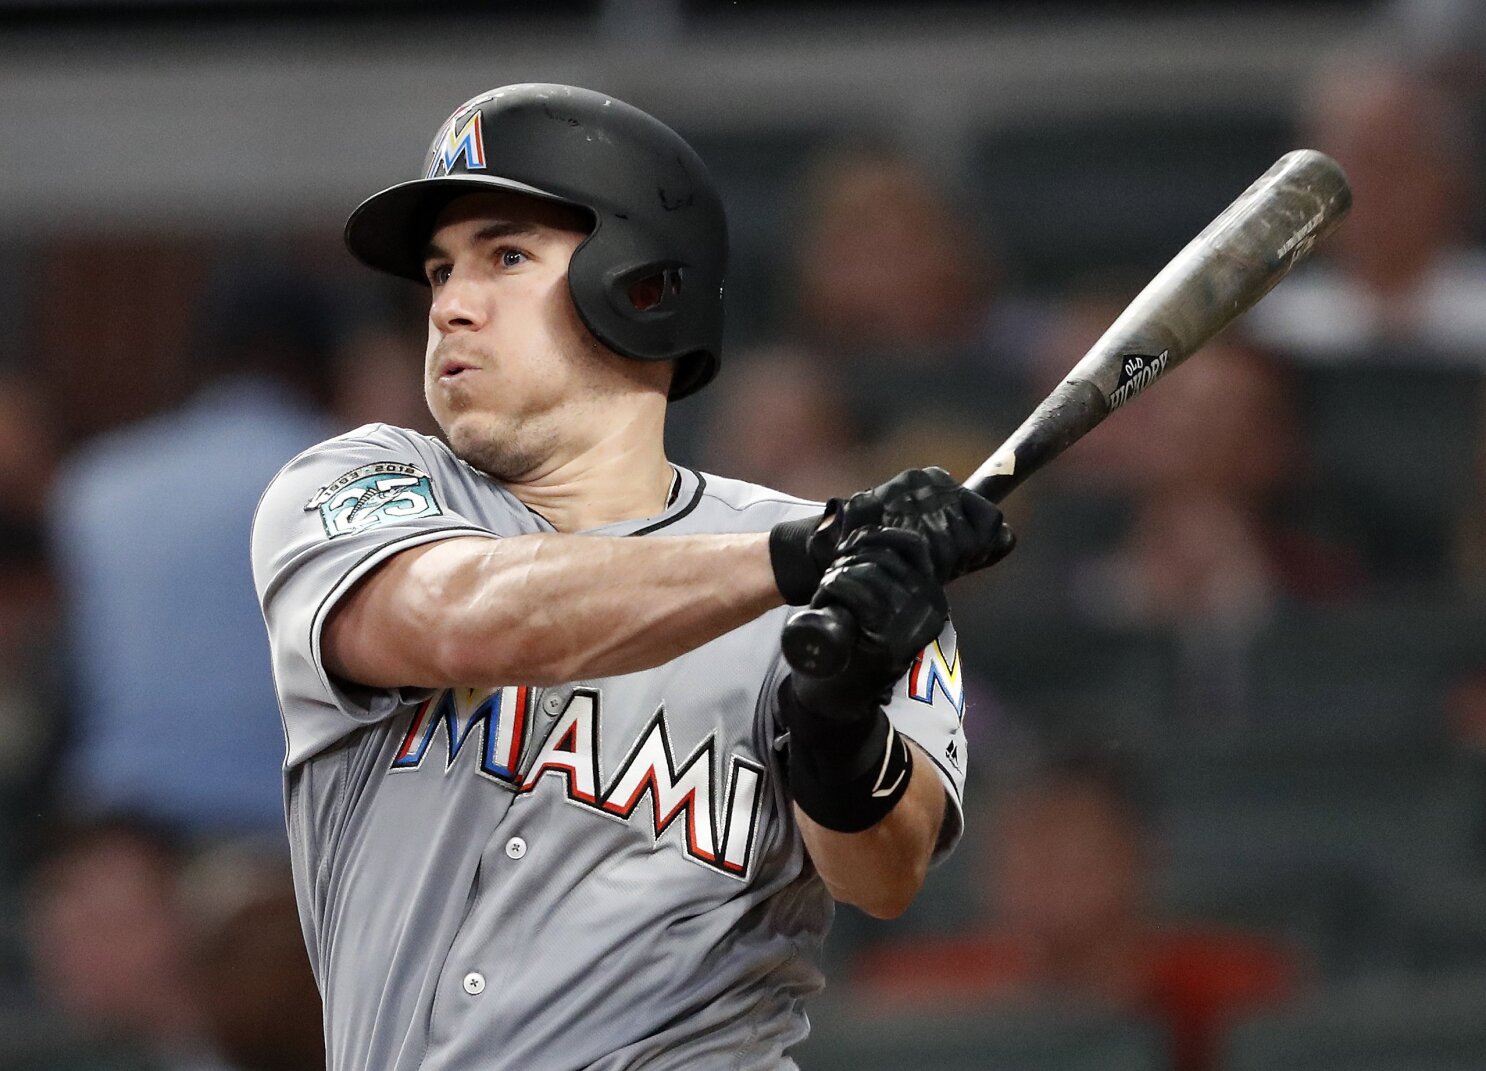 2018 MLB All-Star Game: Marlins catcher J.T. Realmuto makes NL